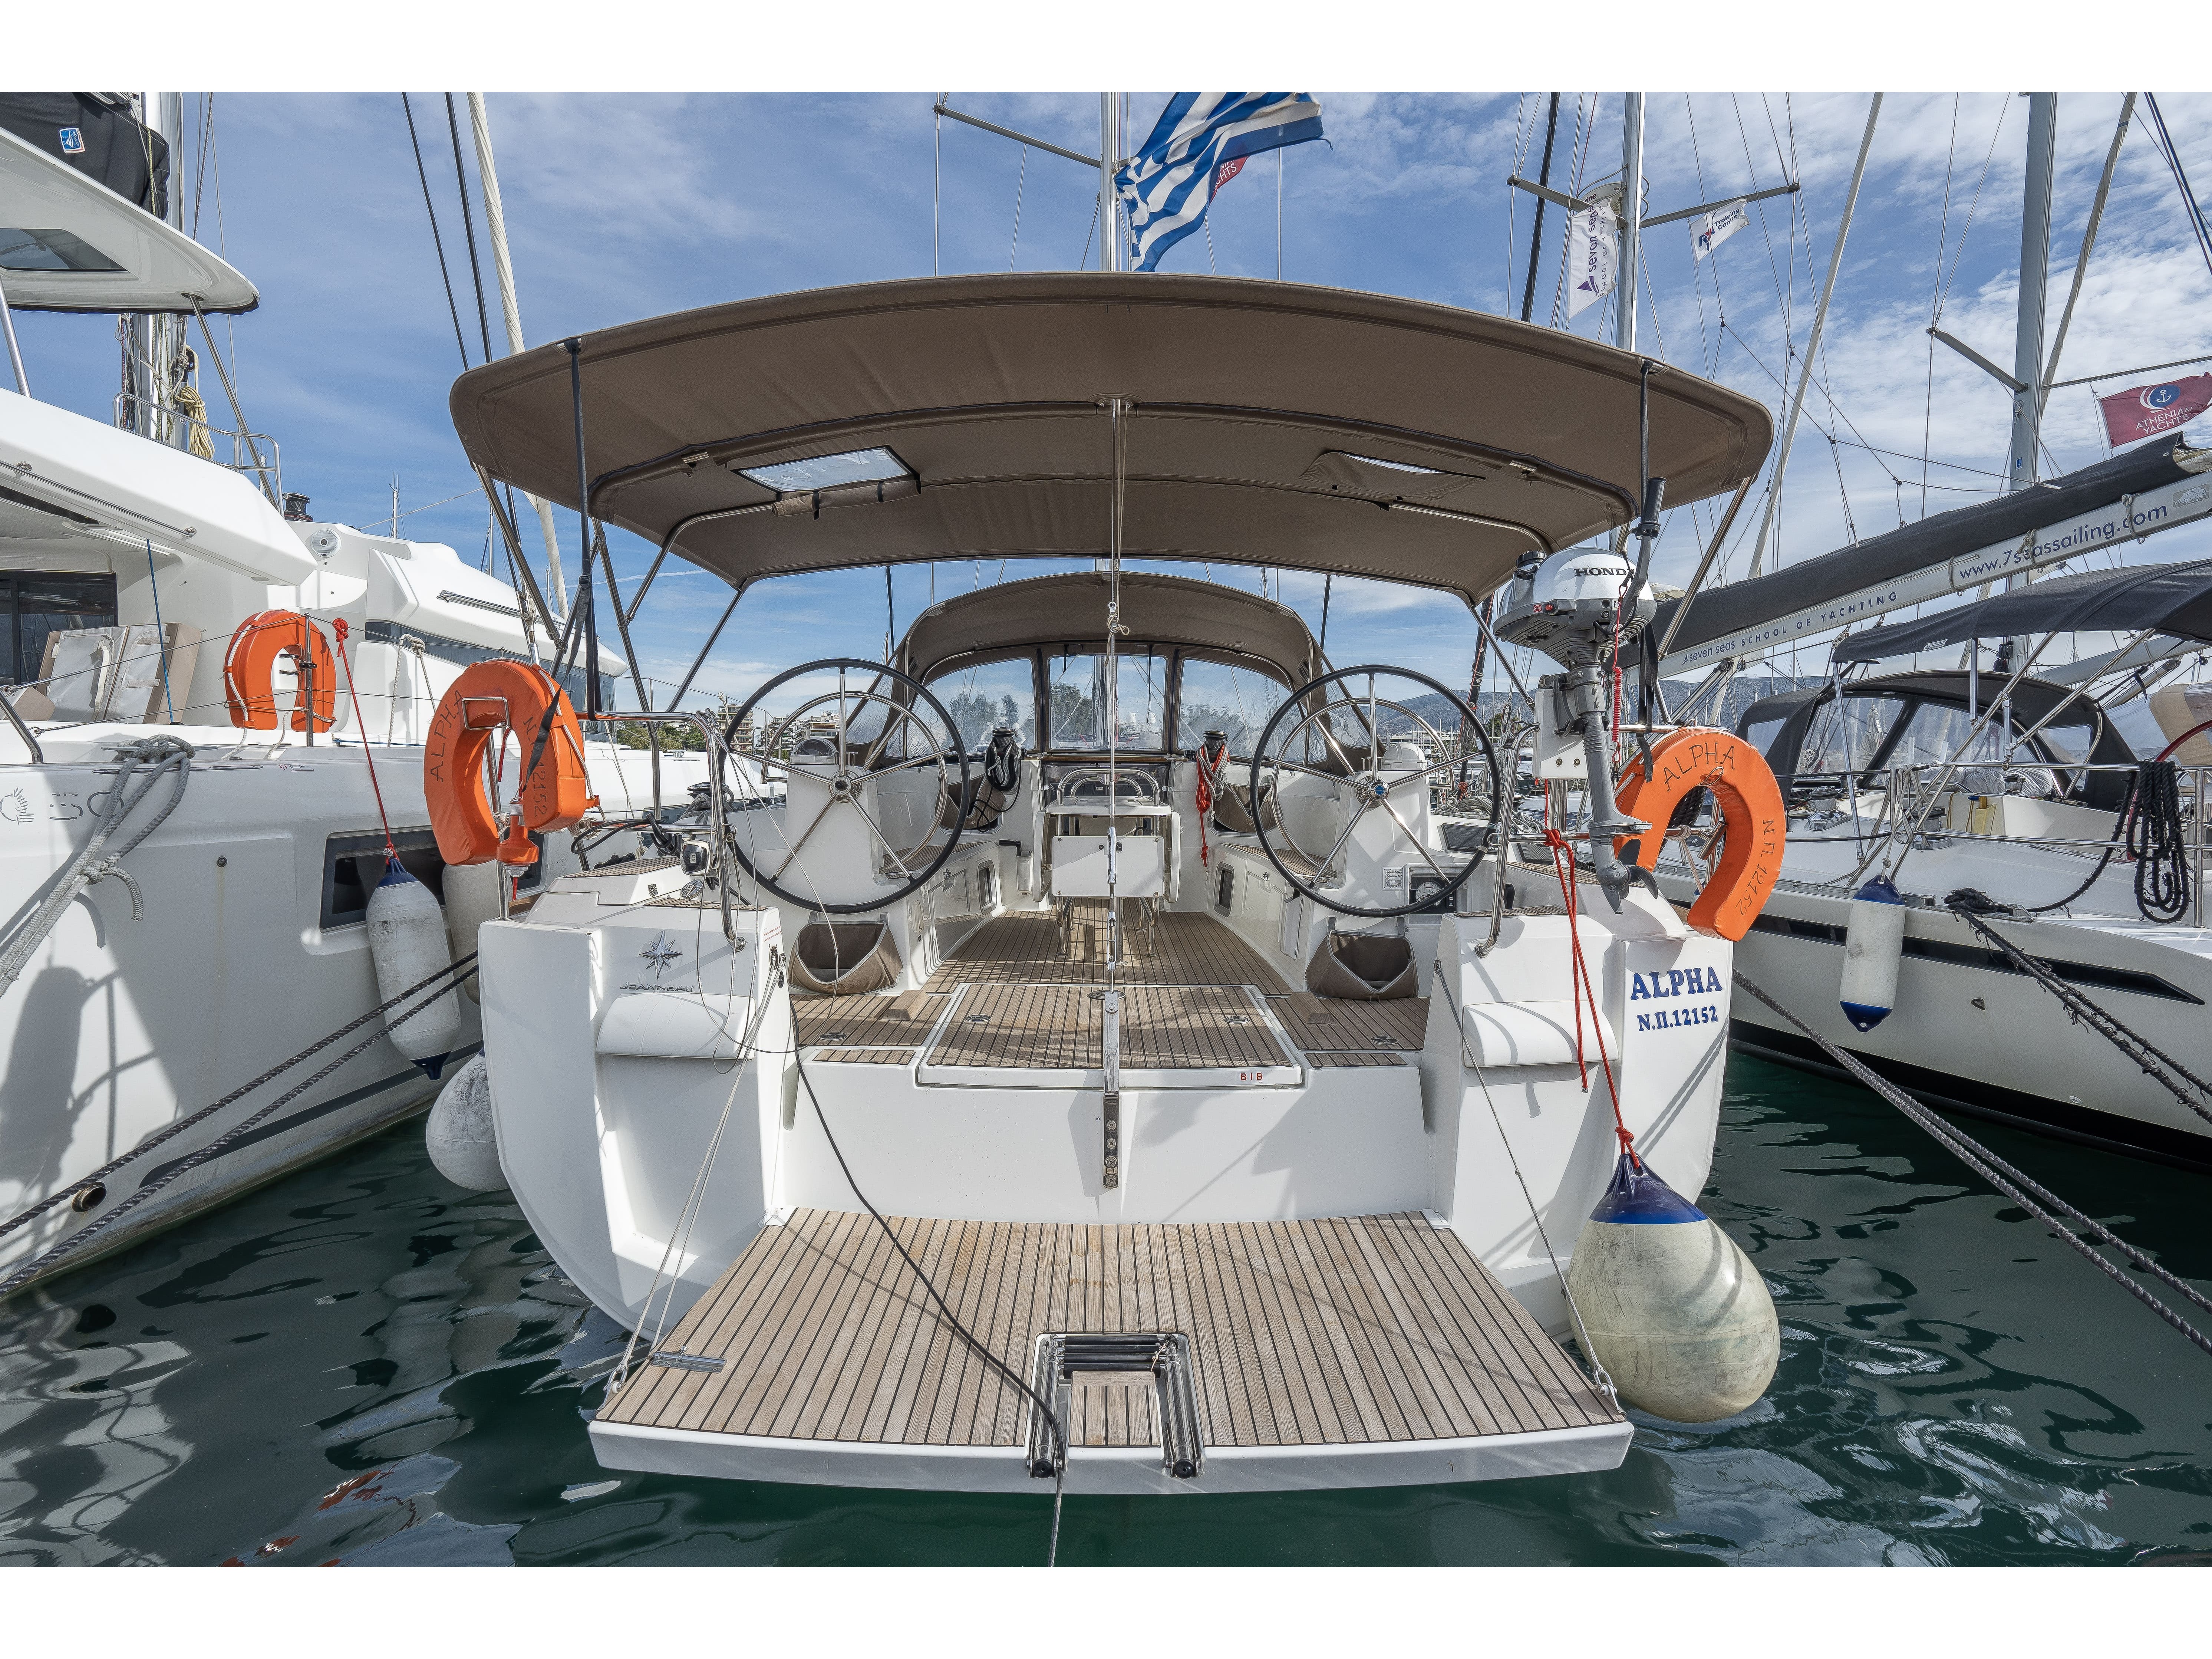 Sun Odyssey 479 - Yacht Charter Cyclades & Boat hire in Greece Cyclades Islands Paros Naoussa Naousa Marina 3